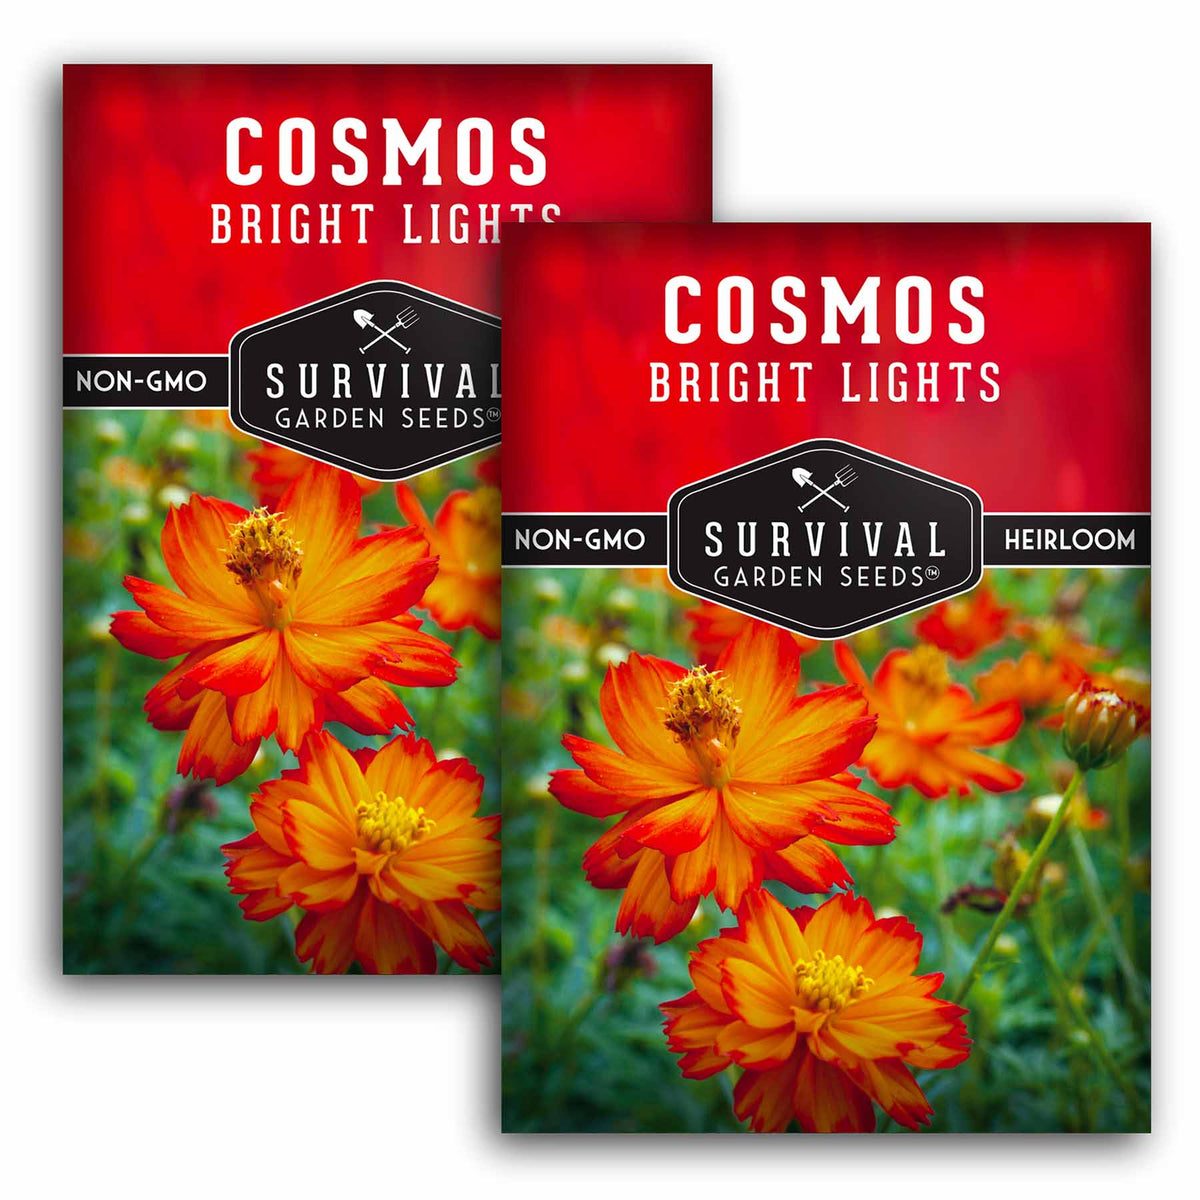 2 packets of Bright Lights Cosmos seeds